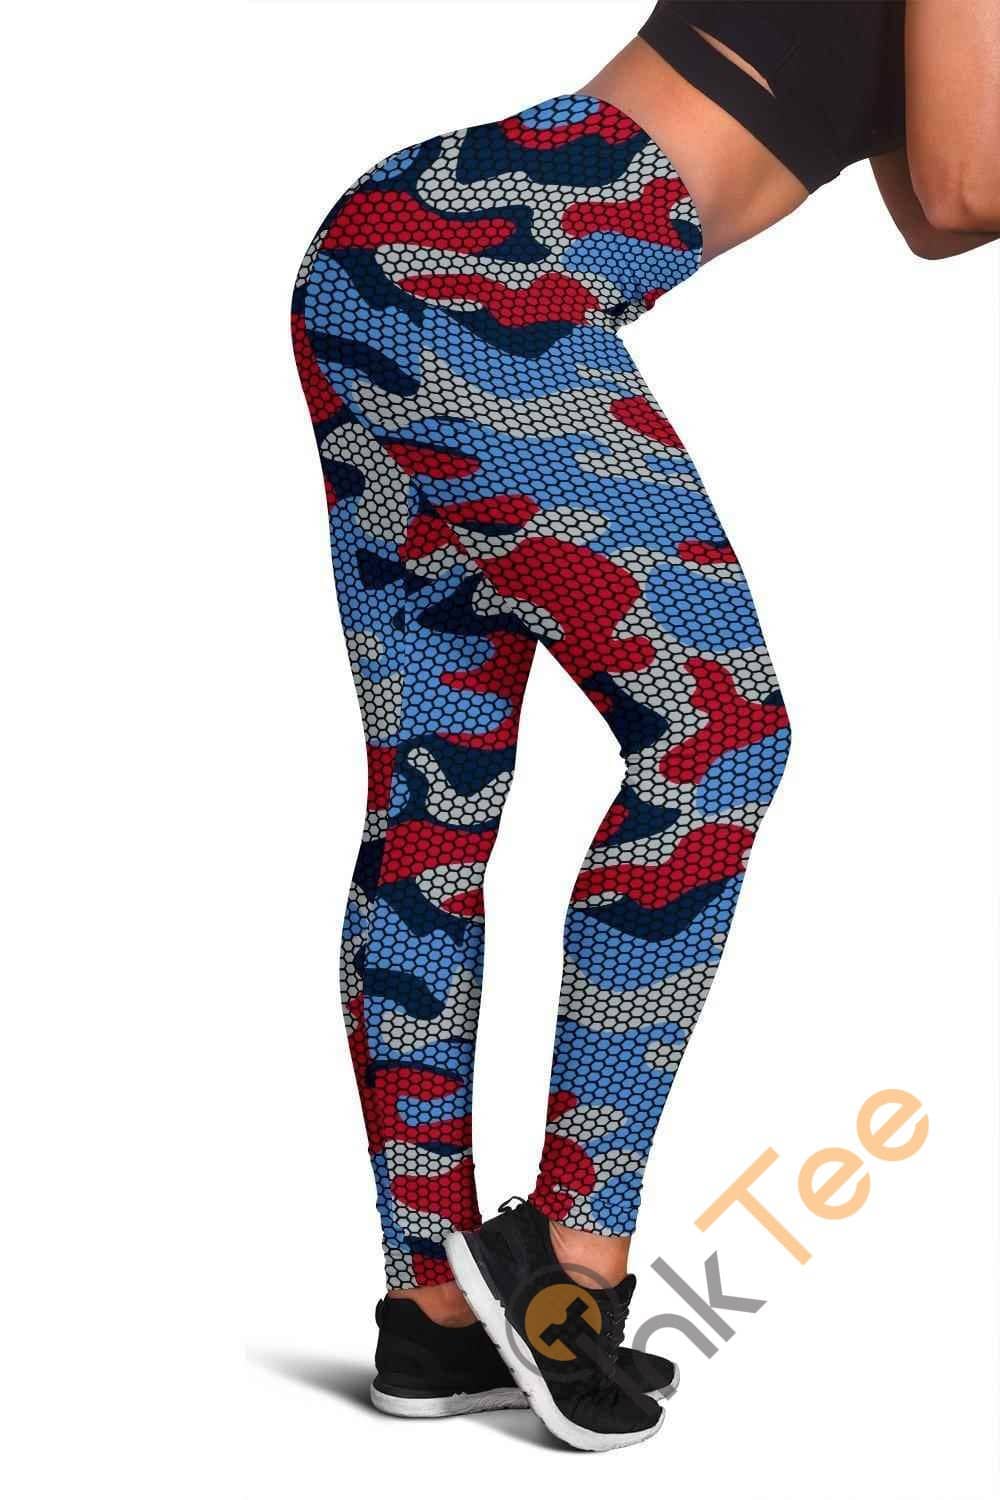 Inktee Store - Tennessee Titans Inspired Hex Camo 3D All Over Print For Yoga Fitness Fashion Women'S Leggings Image